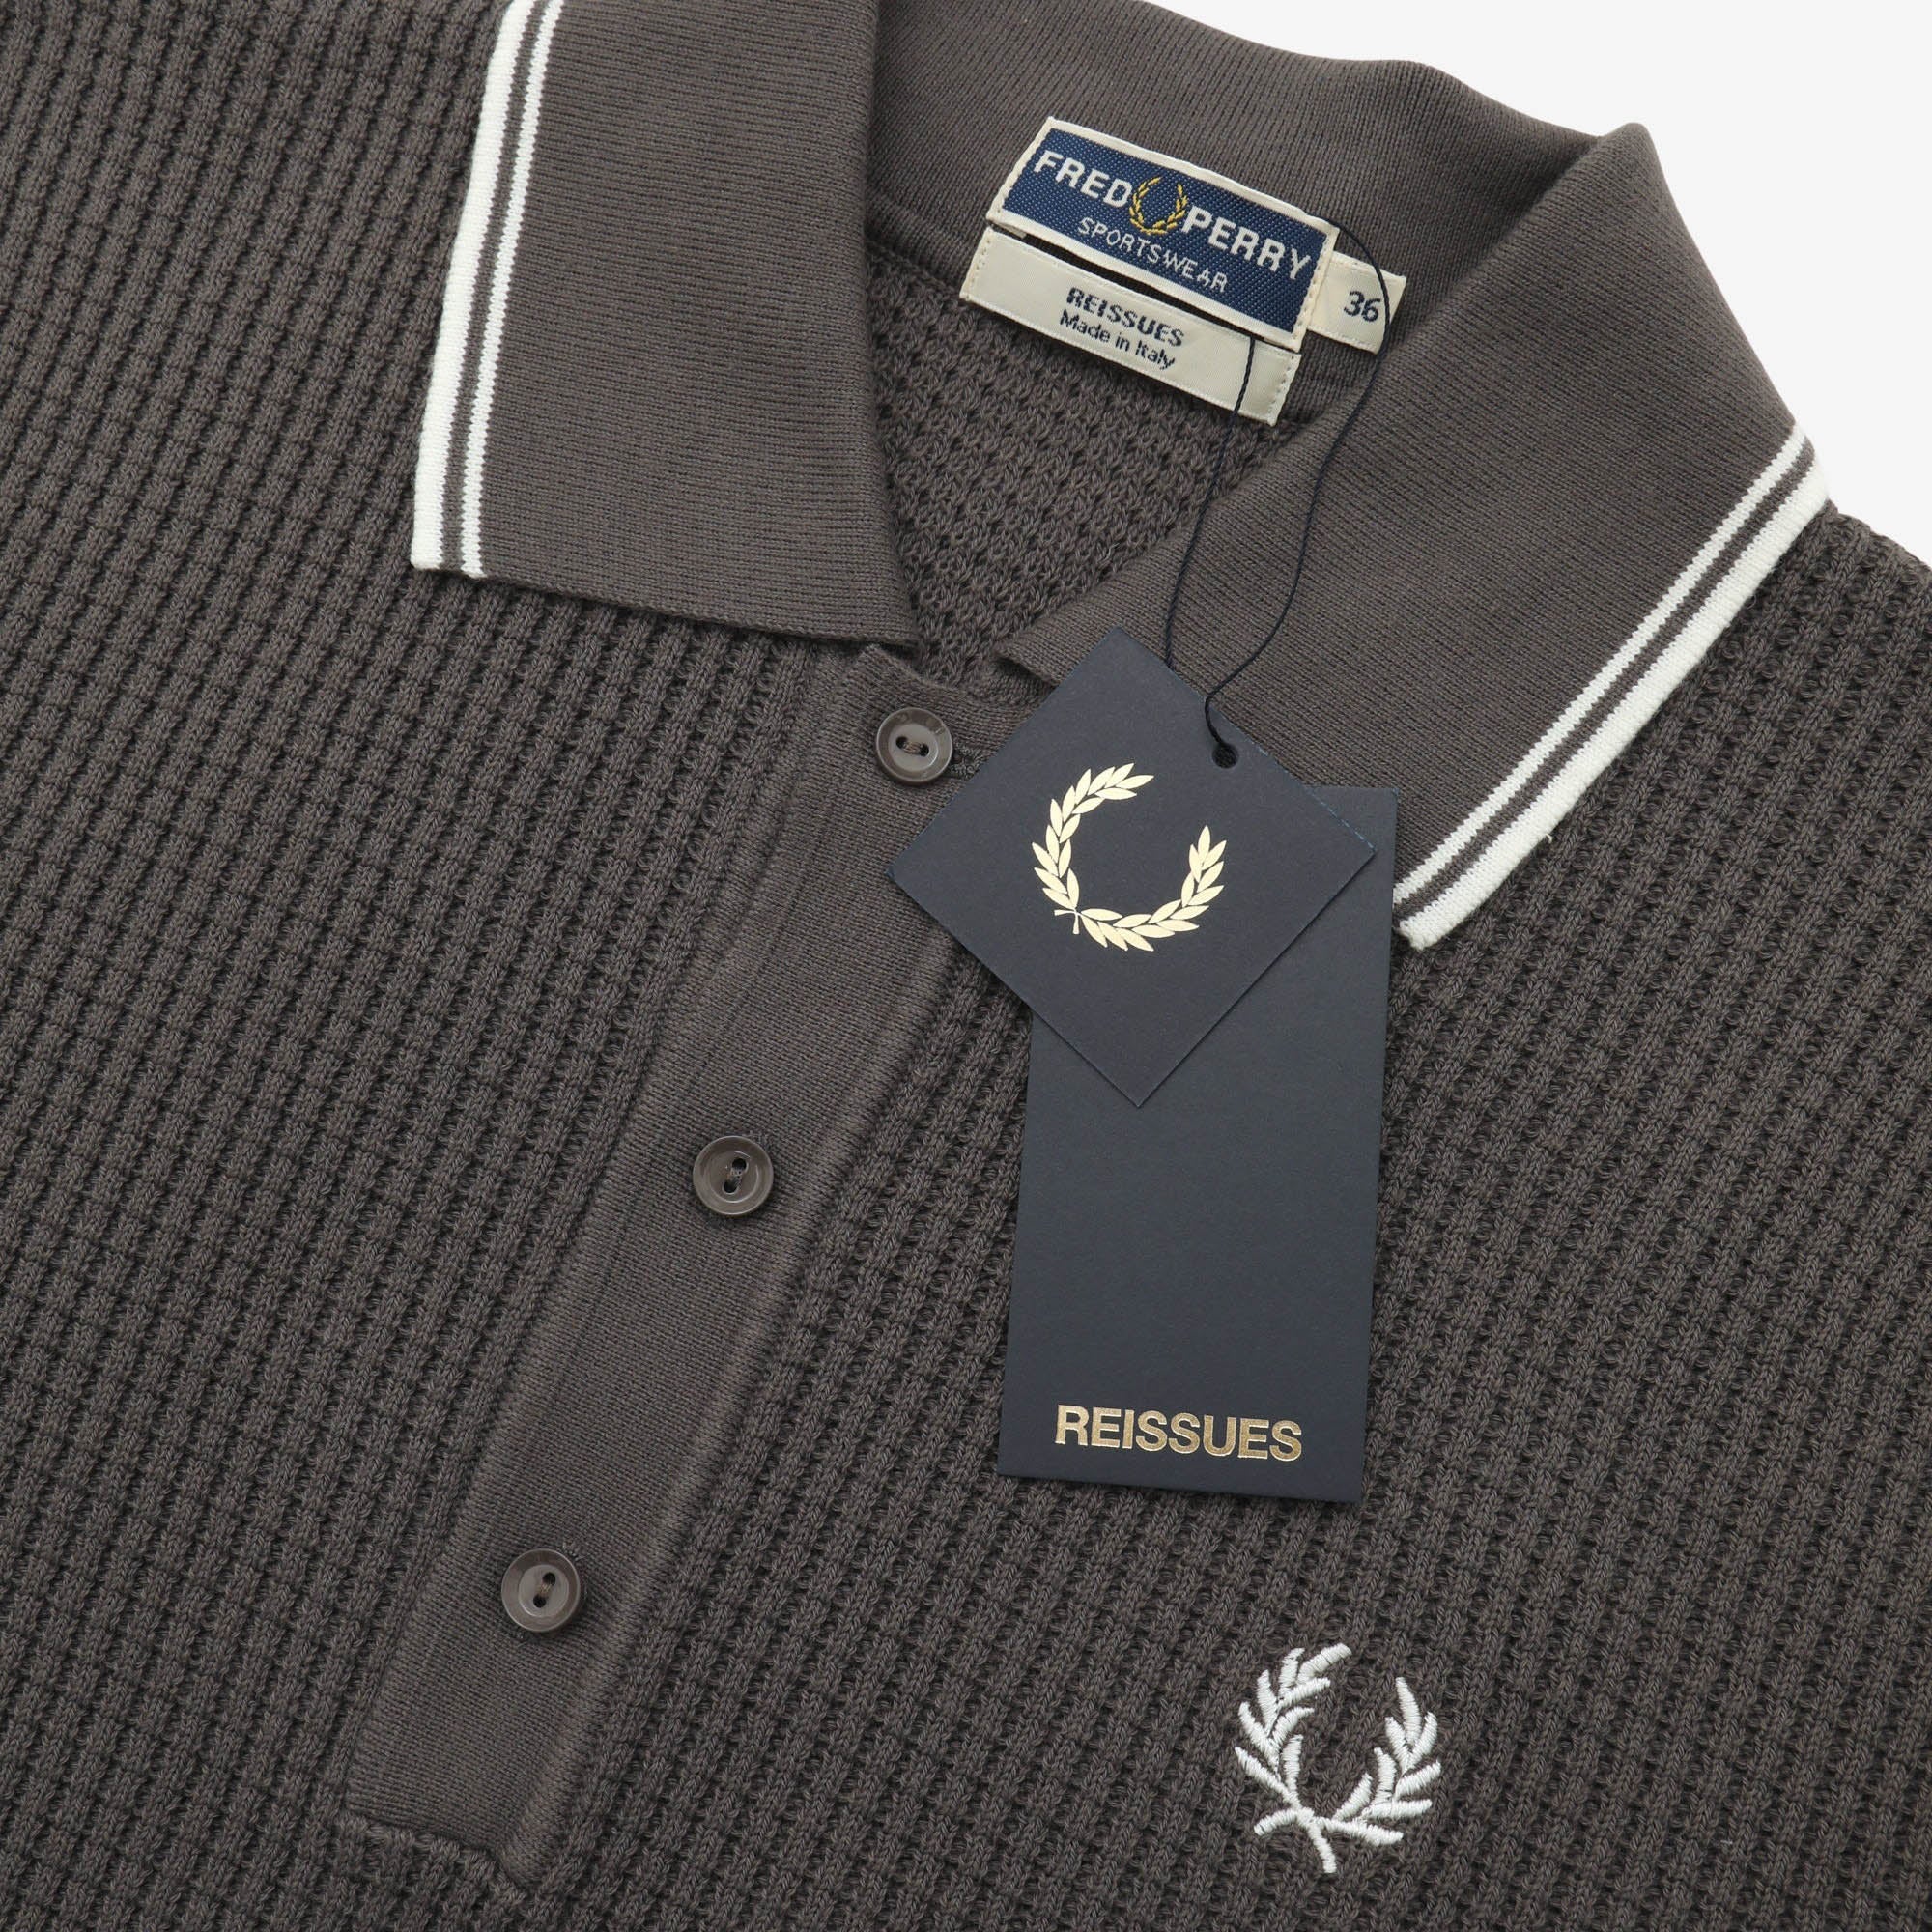 Reissue Textured Knit Polo Shirt